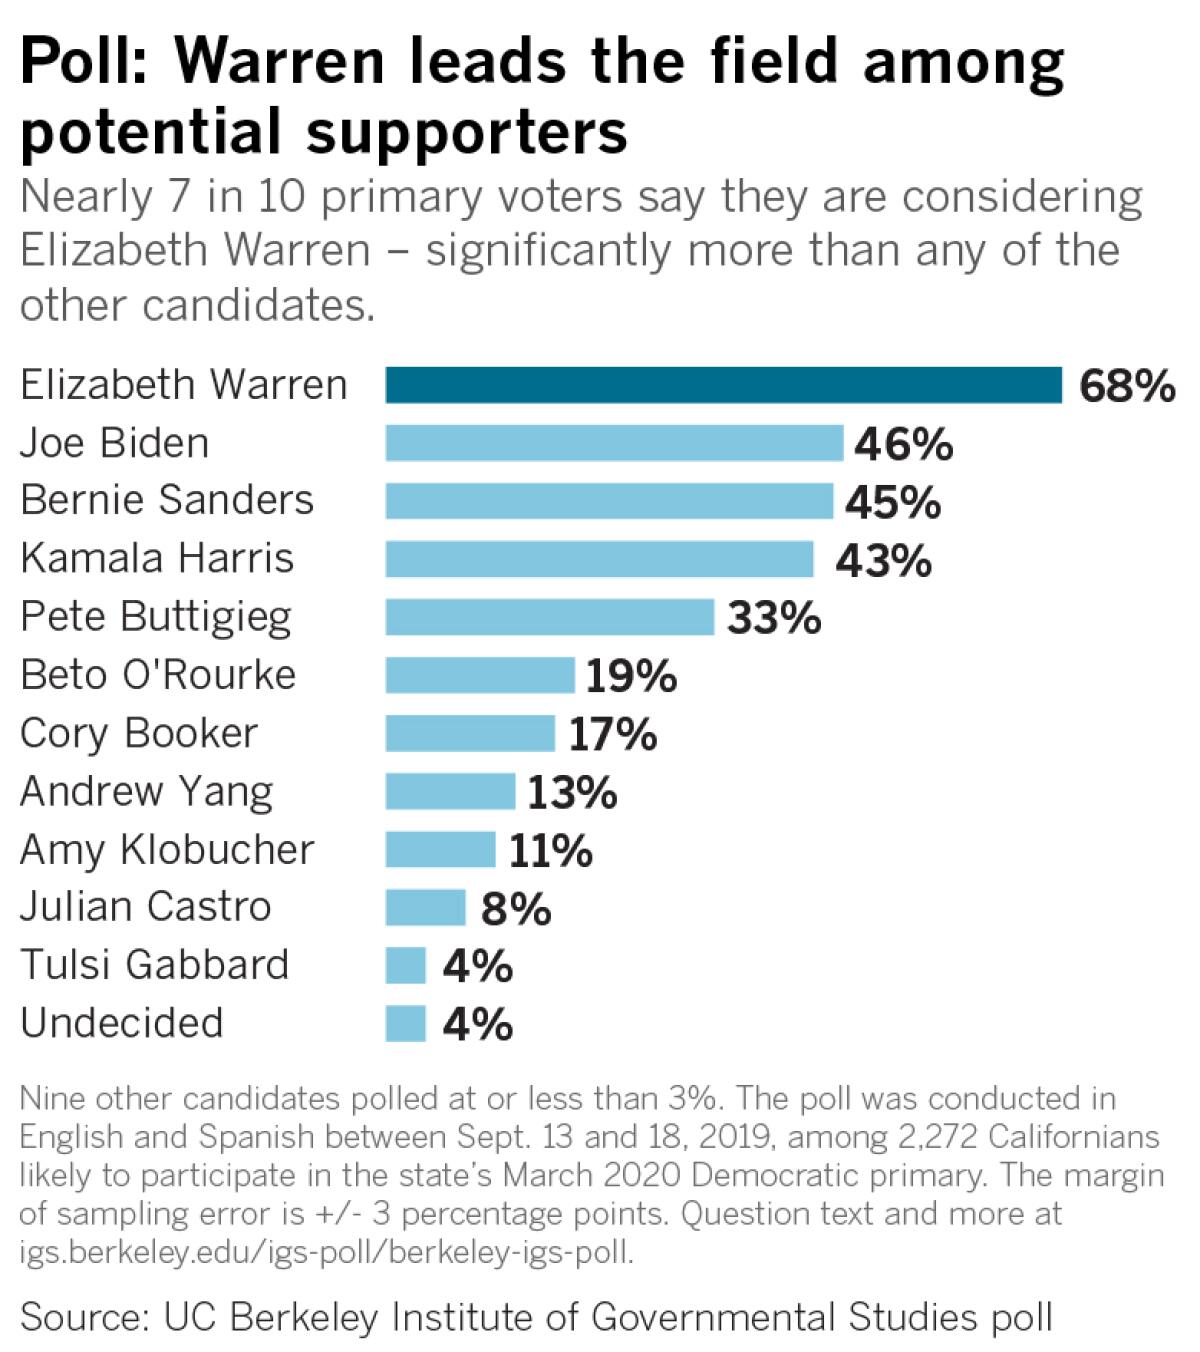 Nearly 7 in 10 primary voters say they are considering Elizabeth Warren – significantly more than any other candidate.